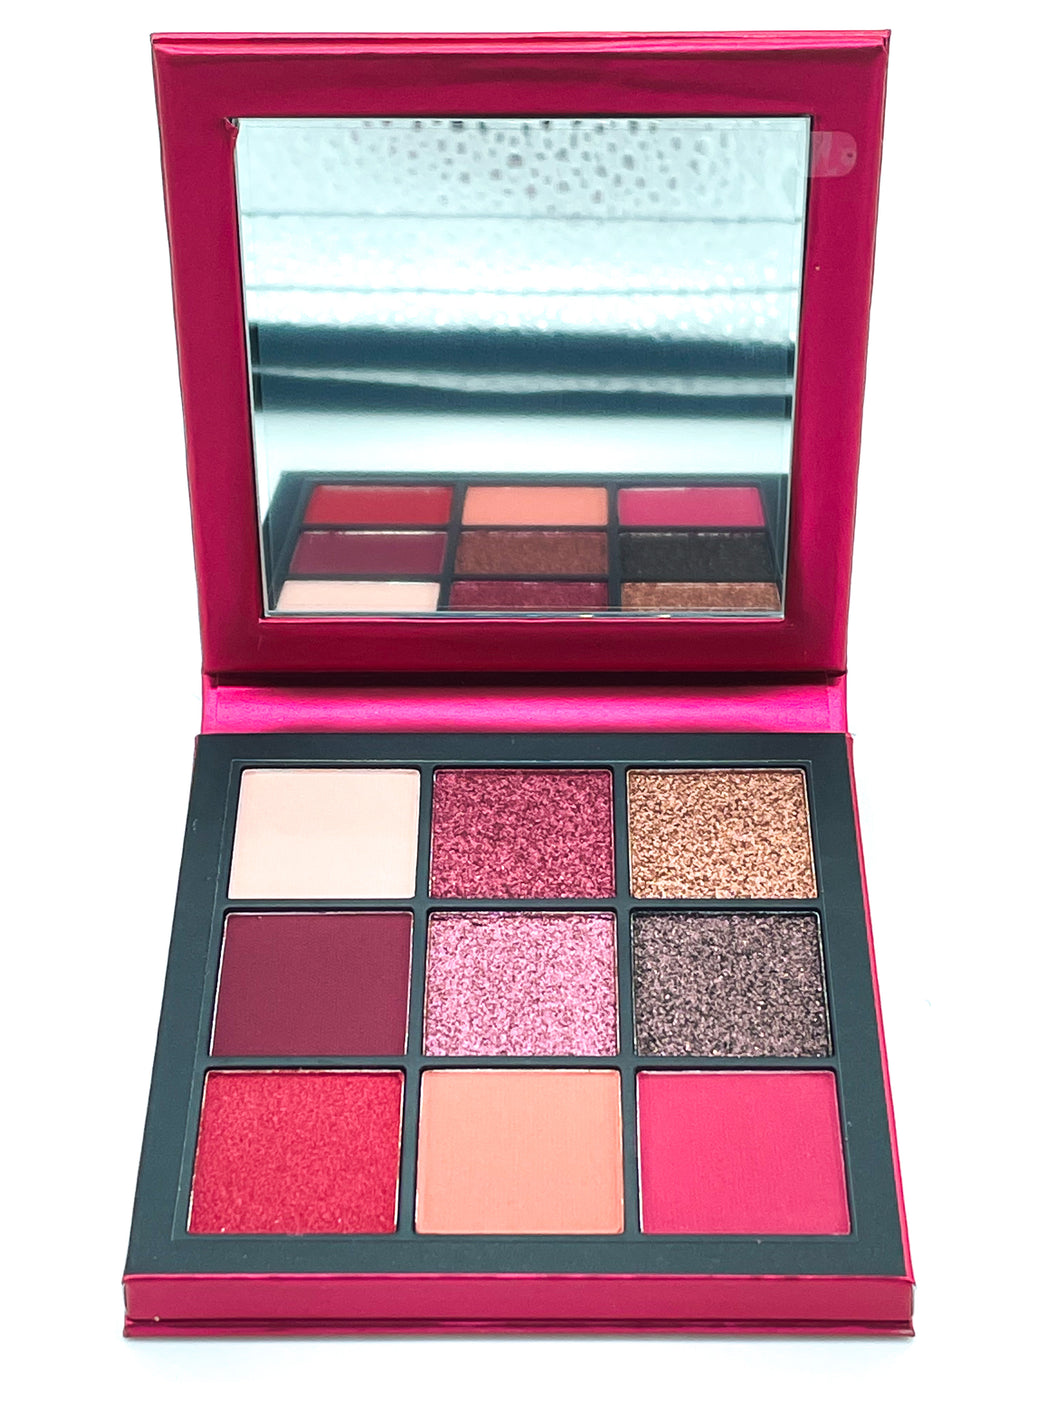 Huda beauty Ruby obsession pallet